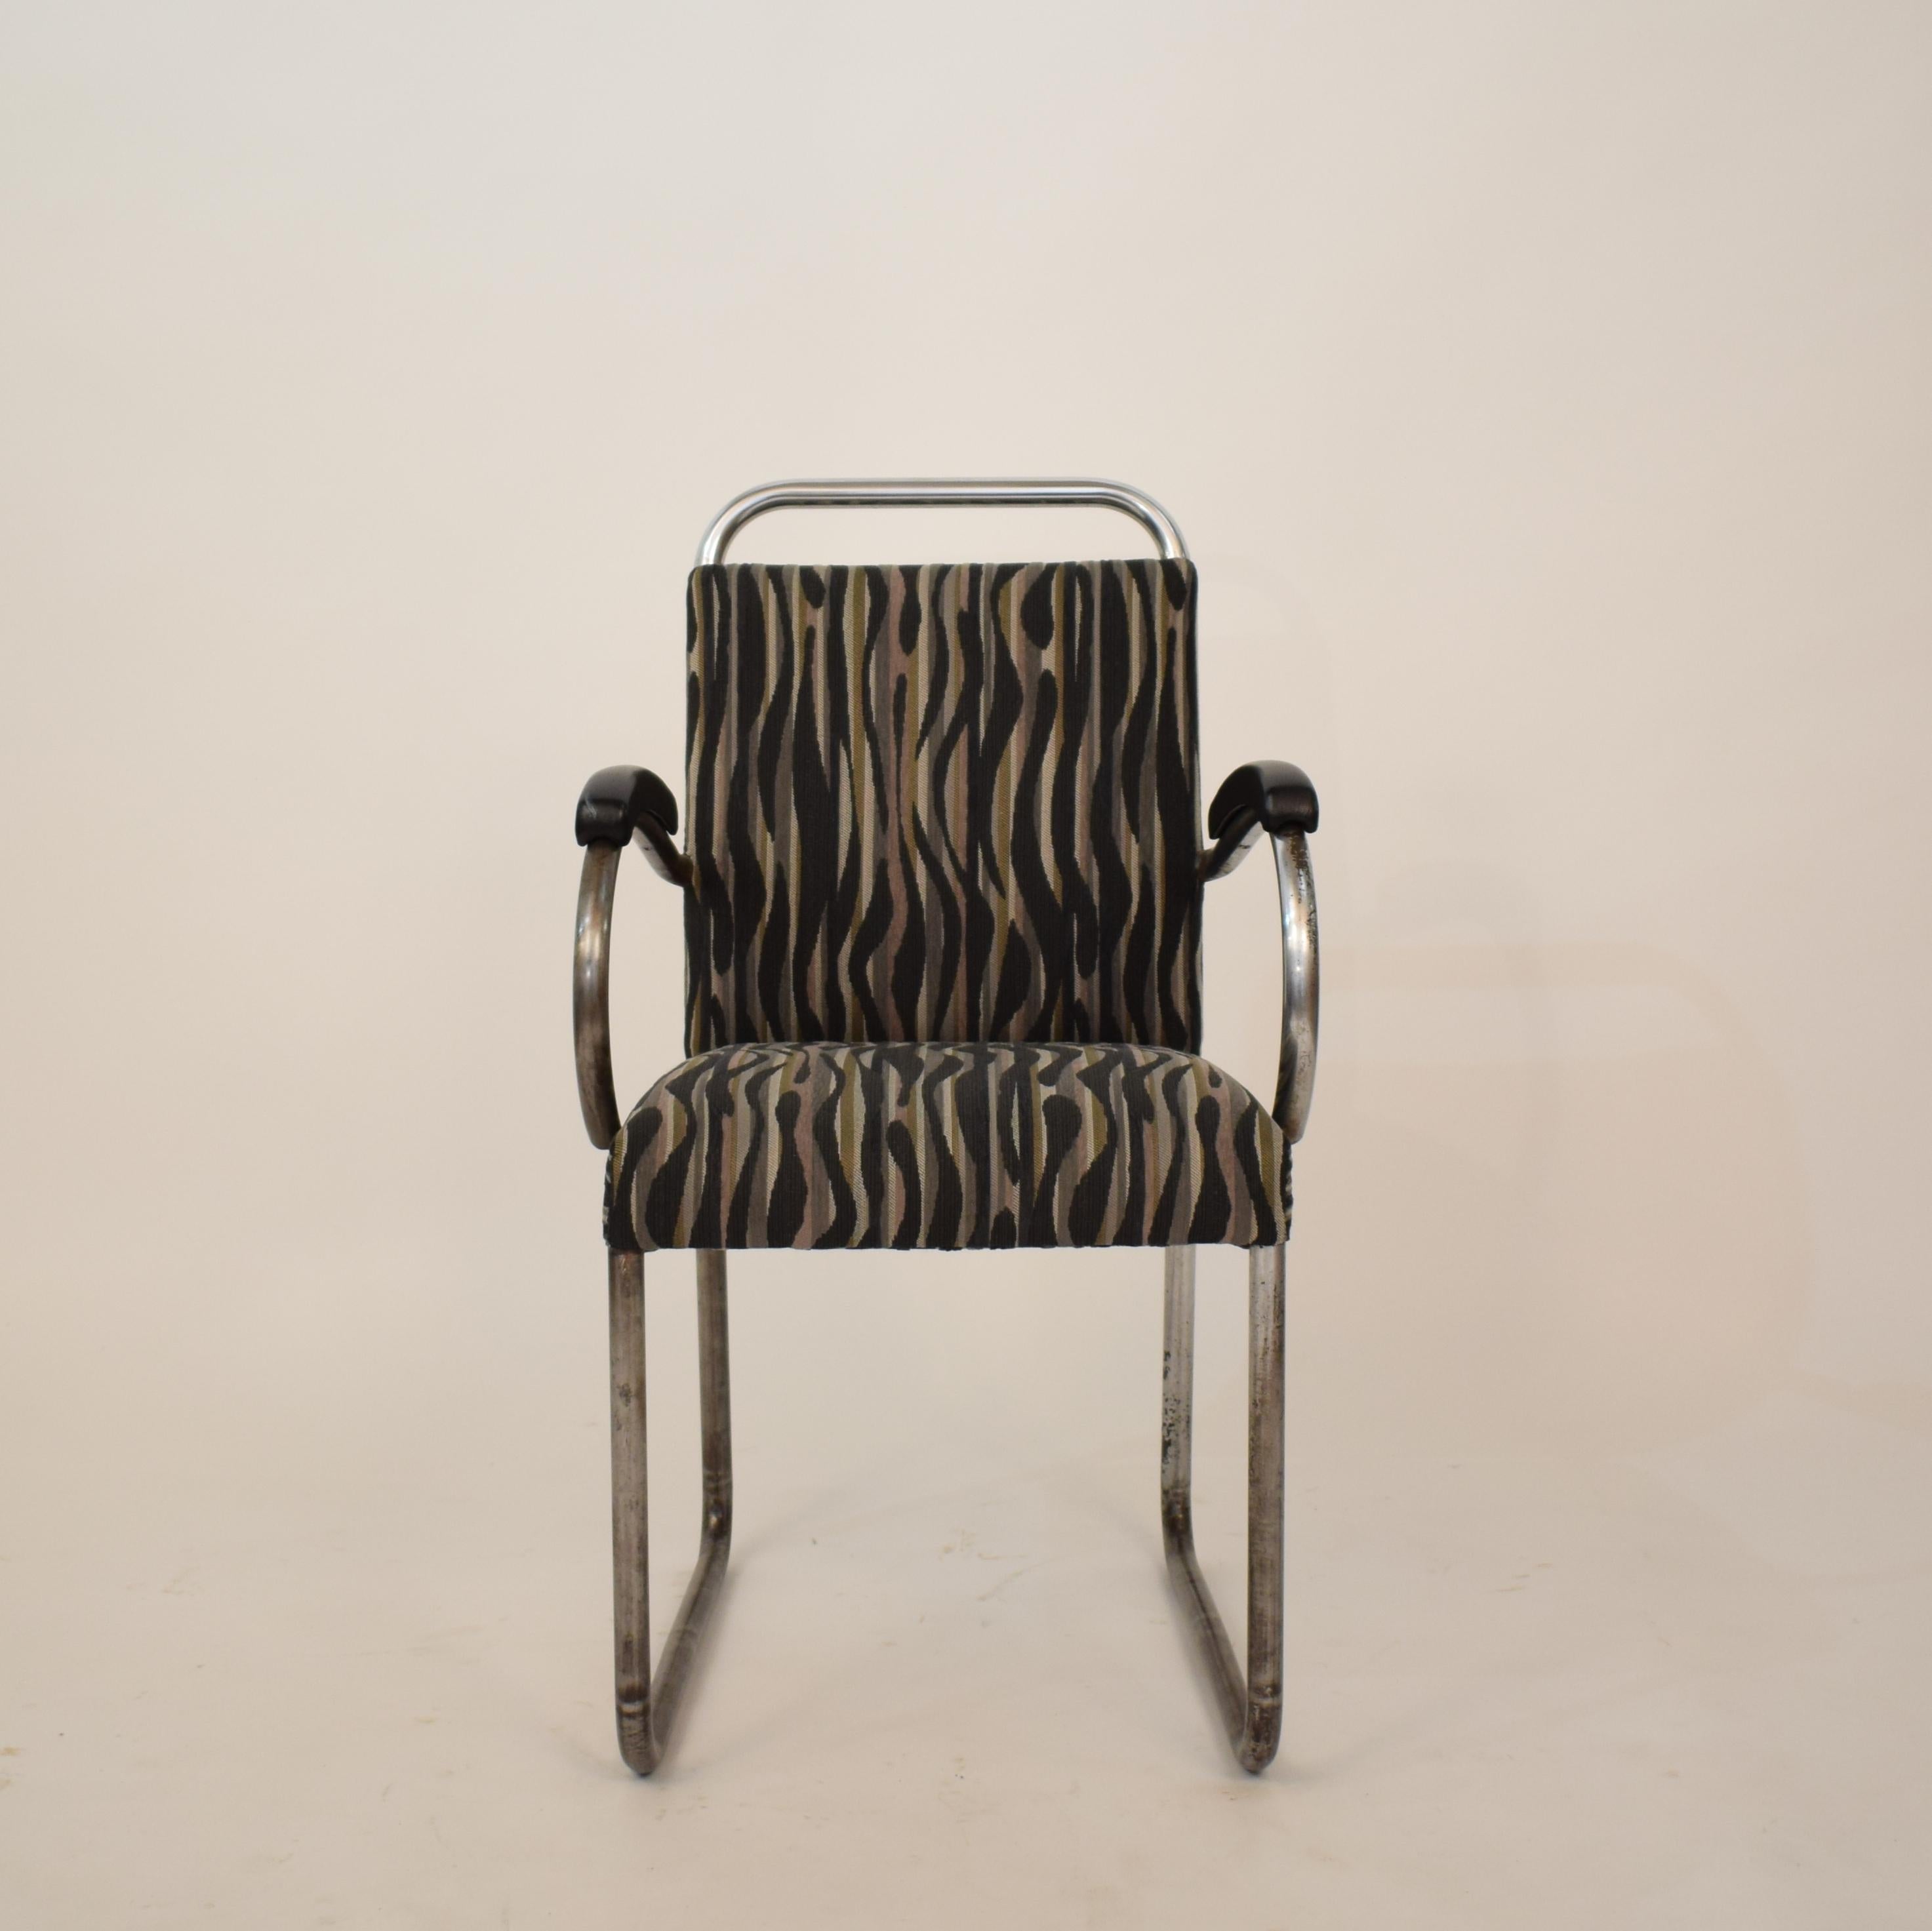 This very rare German Art Deco Tubular steel cantilever armchair was made circa 1925.
It was chromed. The chrome come of at some spots but gives the chair a great look and Patina.
The chair is re-upholstered in fabric and leather.
This elegant and